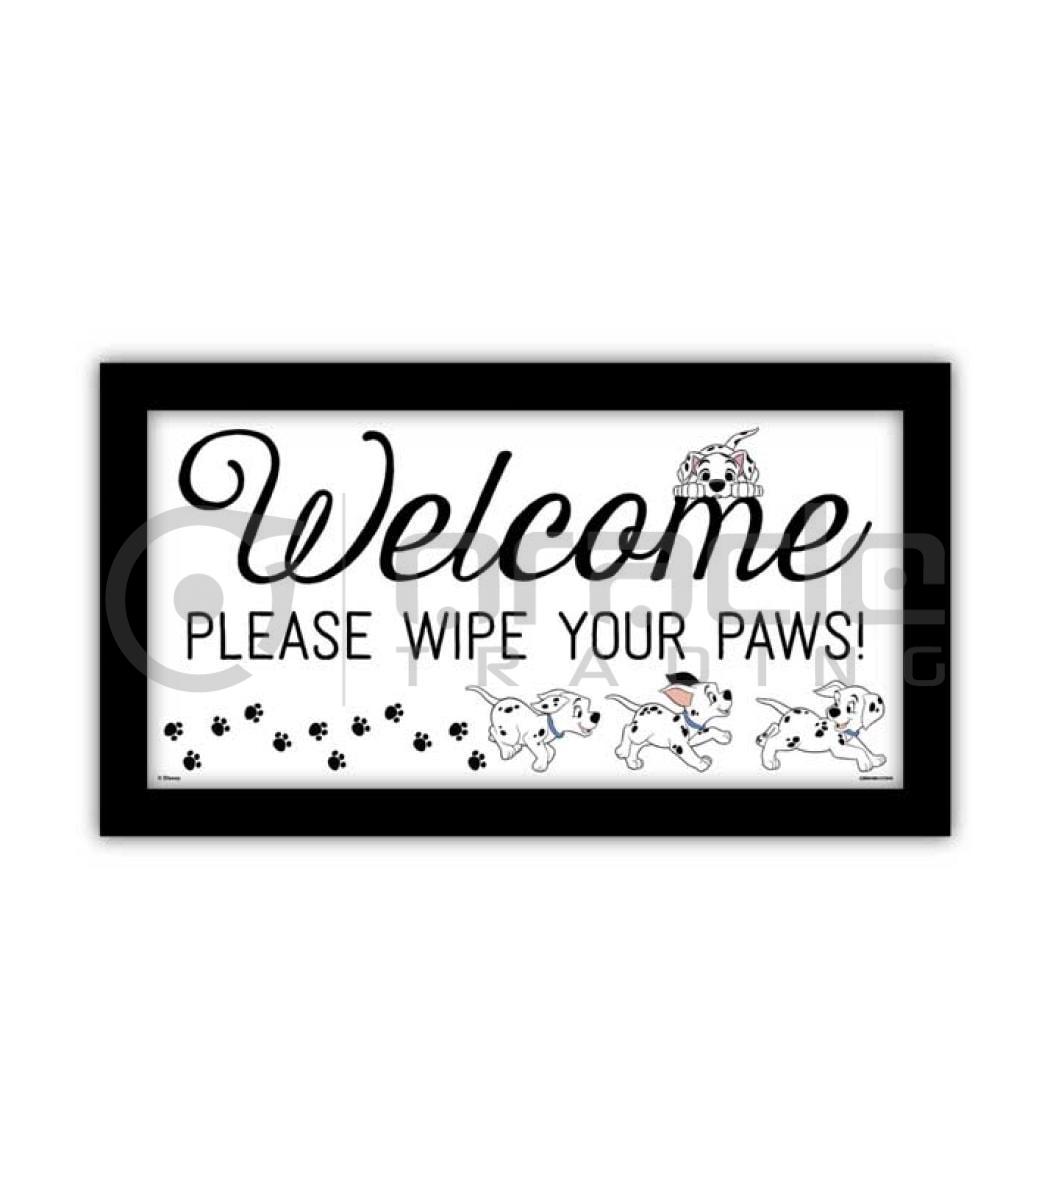 Disney Wall Art - Wipe Your Paws - 10" x 18" Framed